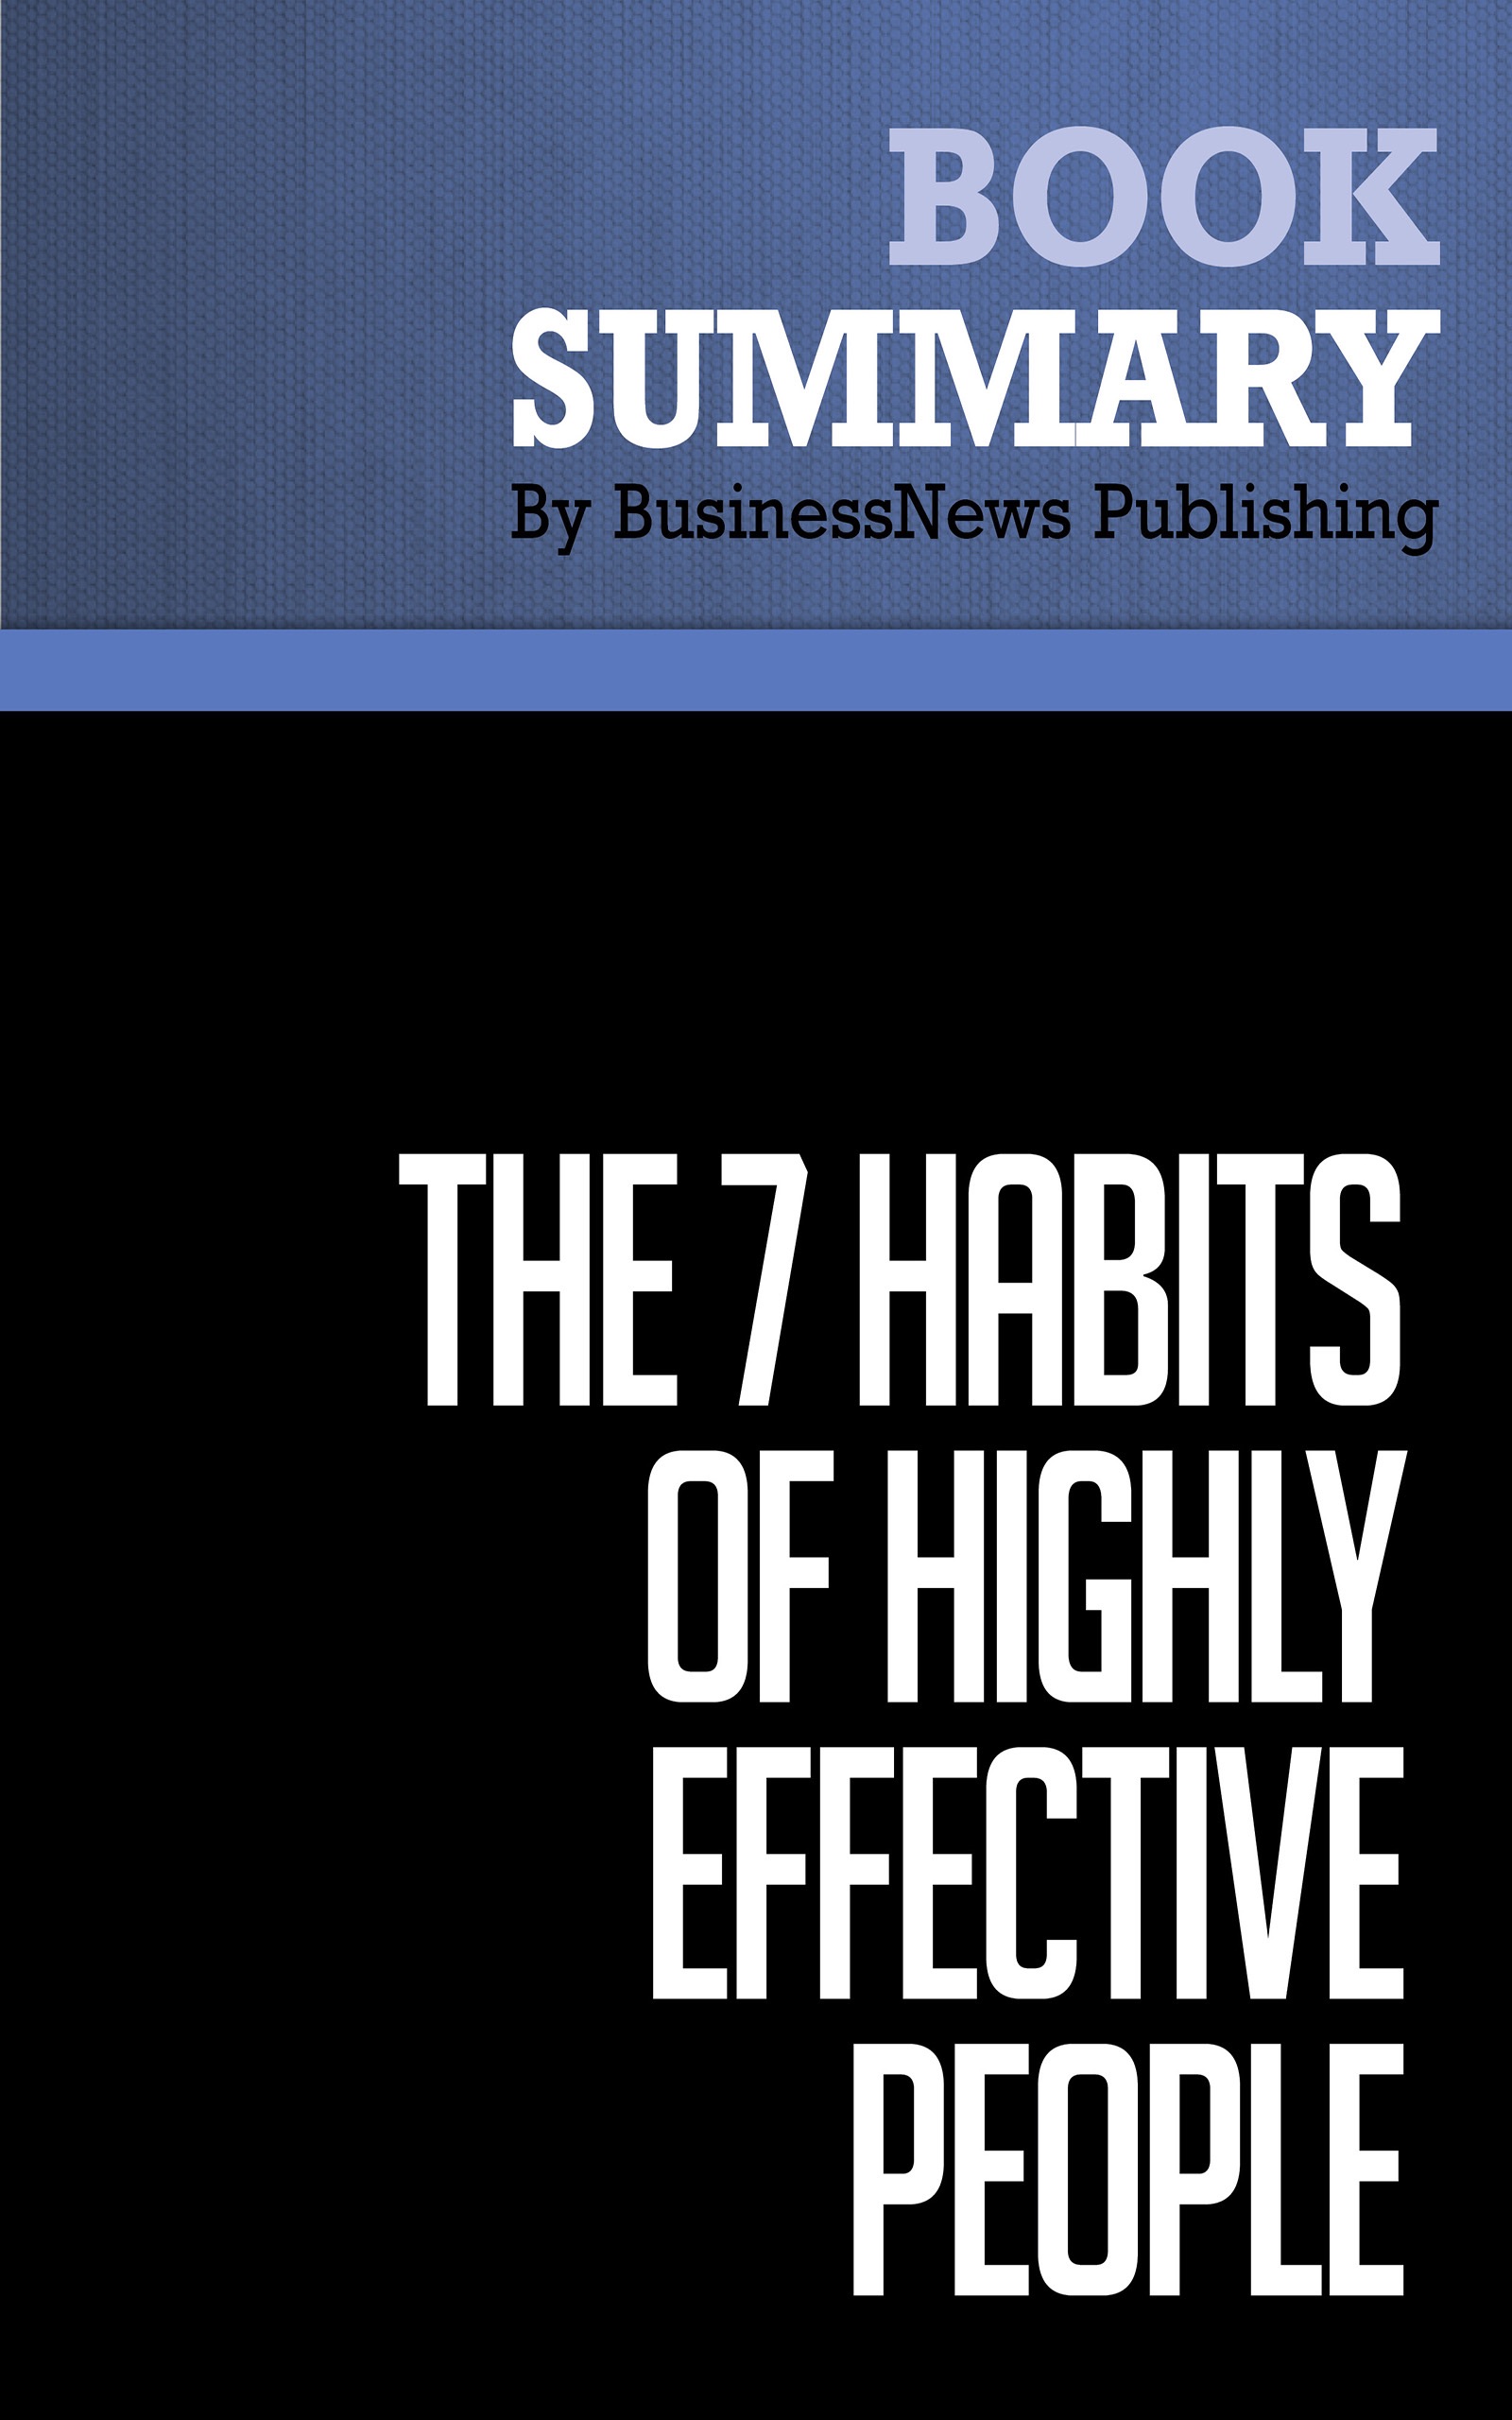 7 Habits of Highly effective People by Stephen R. Covey